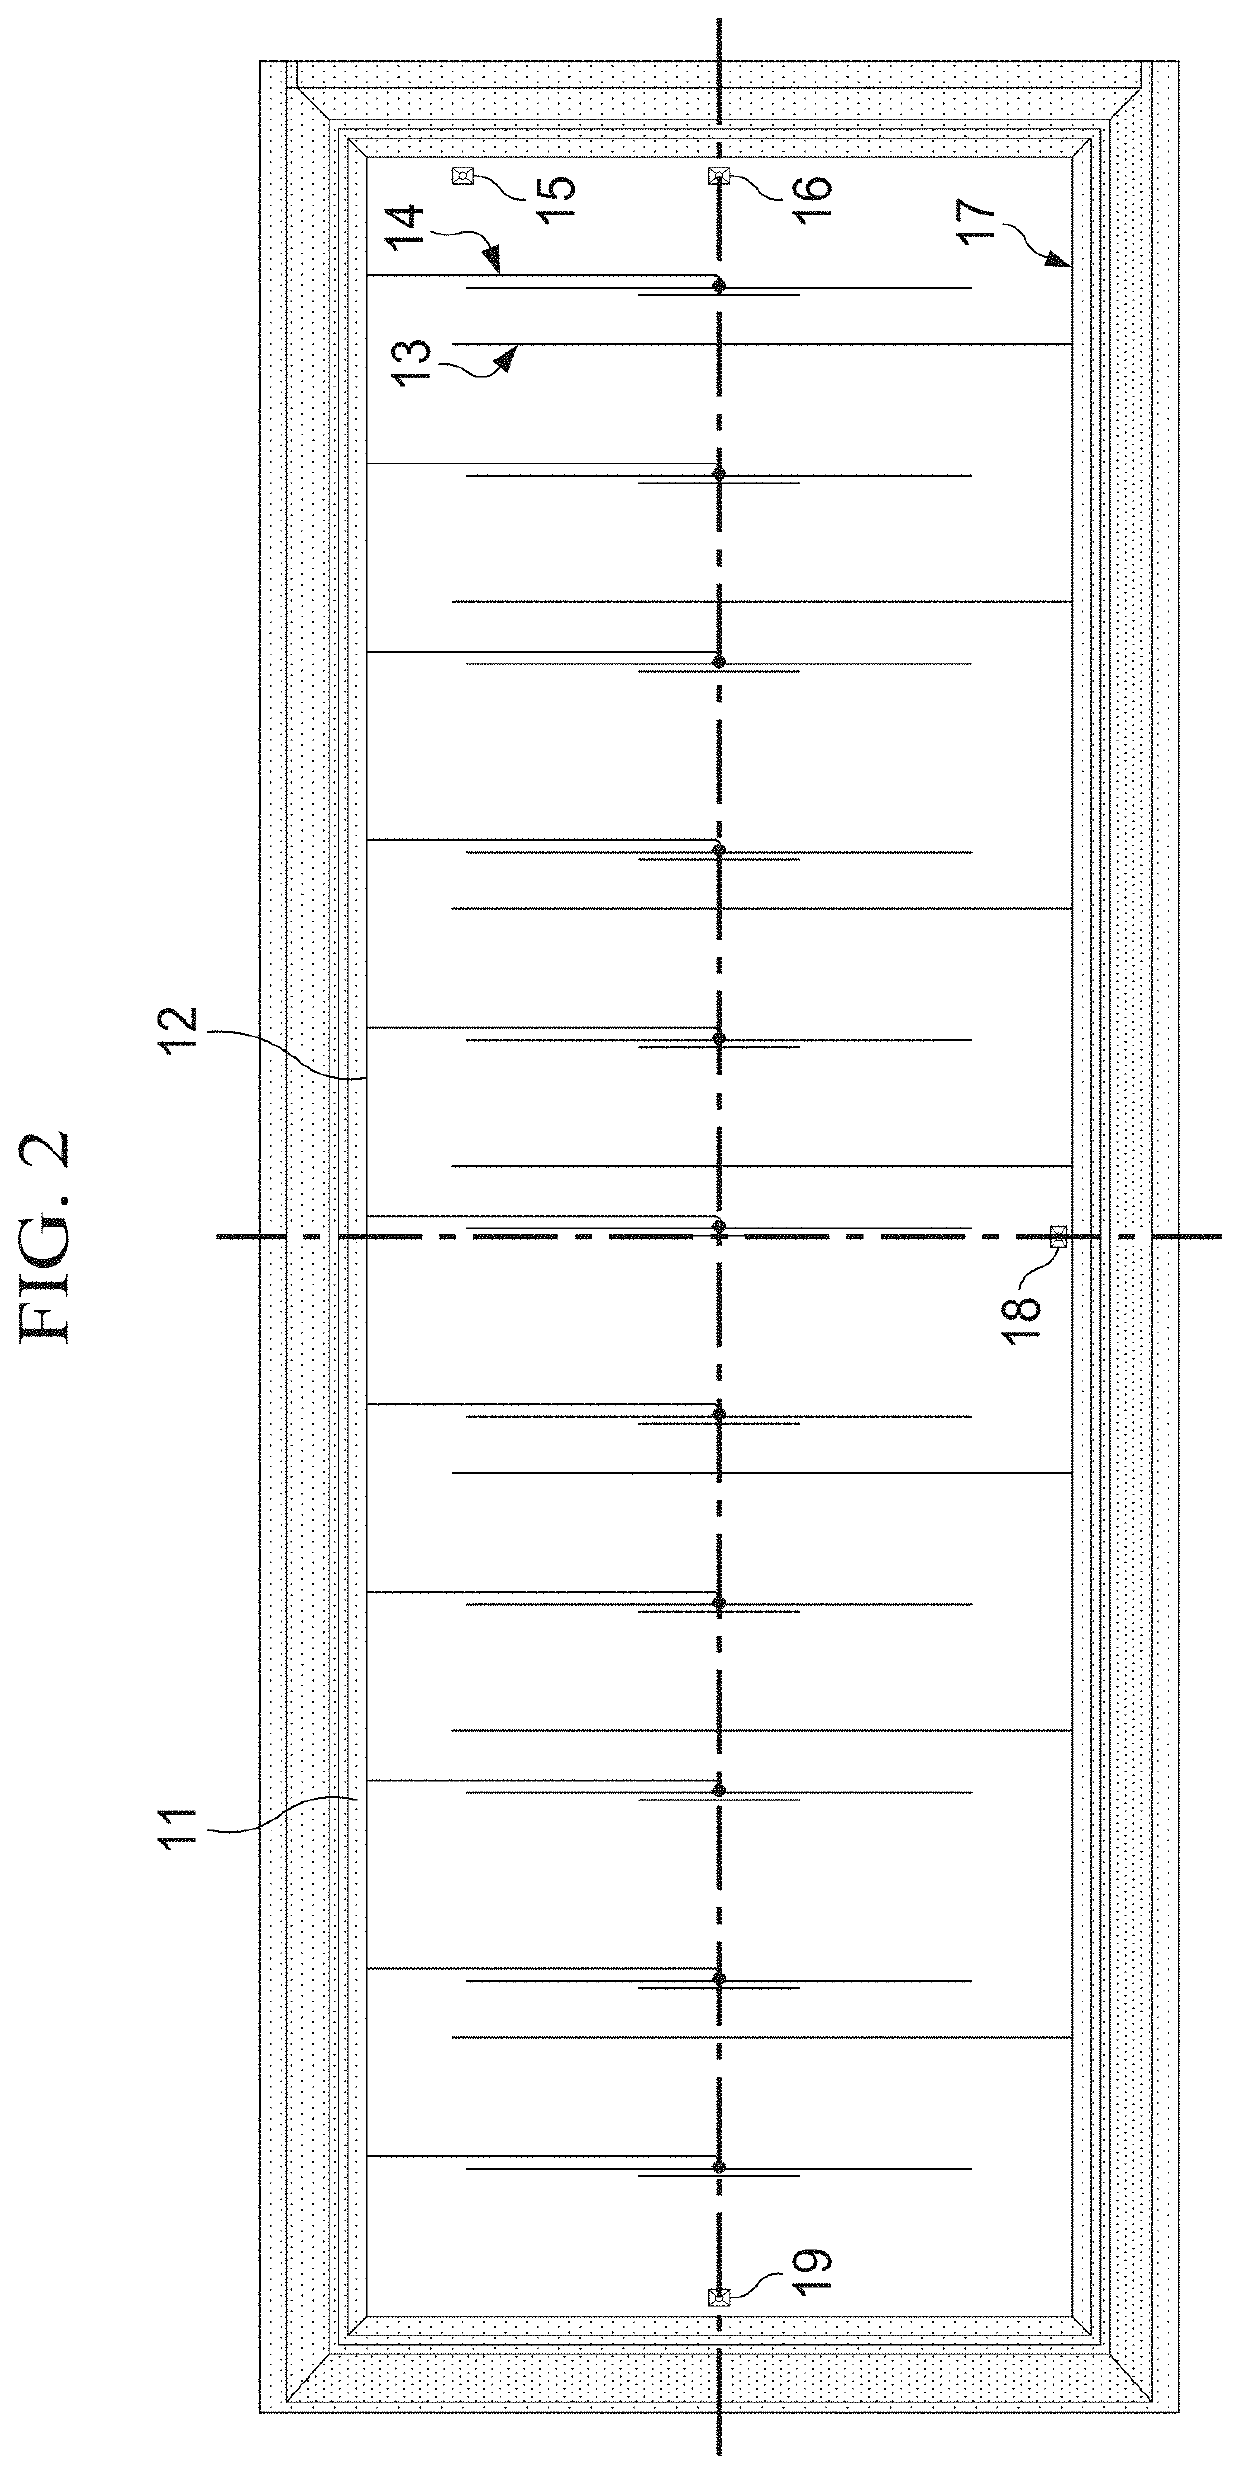 Methods of culturing a floating aquatic species using an apparatus for fluid conveyance in a continuous loop